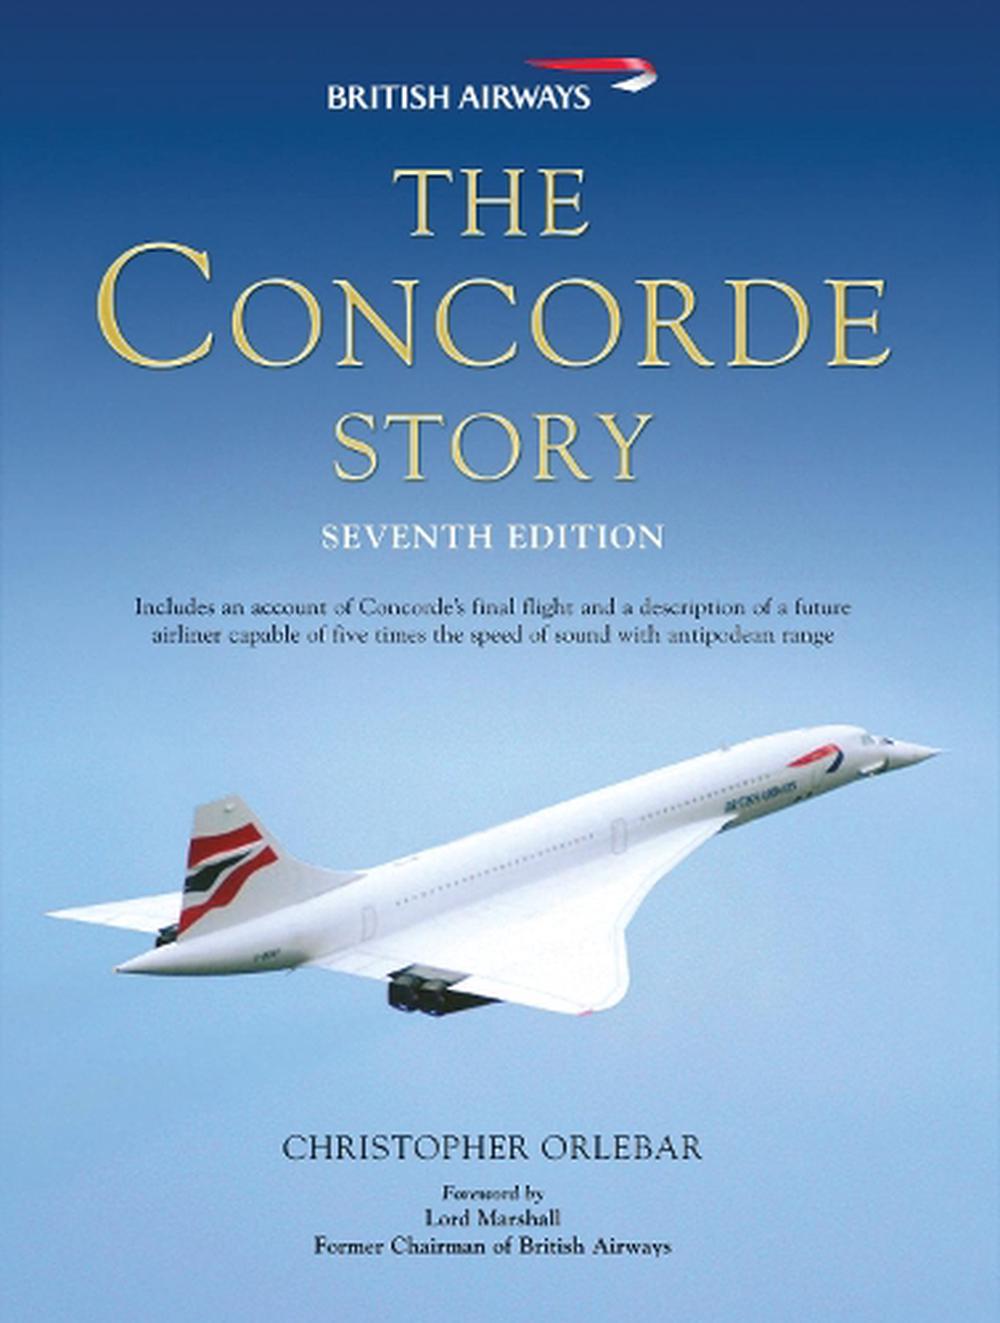 The Concorde Story: Seventh Edition by Christopher Orlebar (English ...